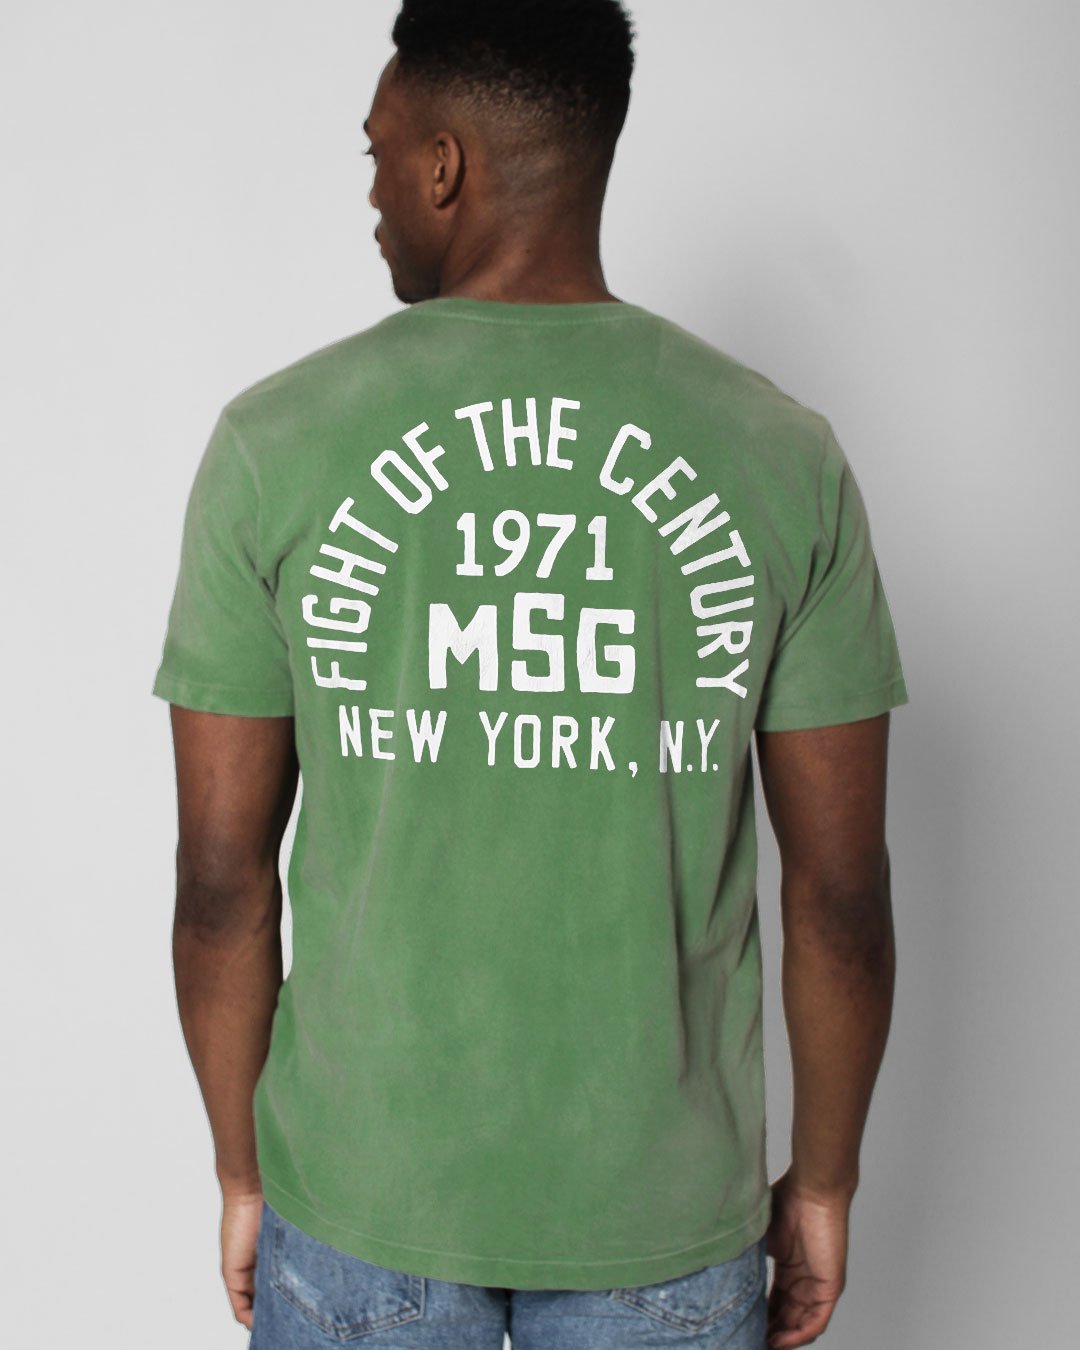 FOTC - Frazier 1971 MSG Tee - Roots of Inc dba Roots of Fight